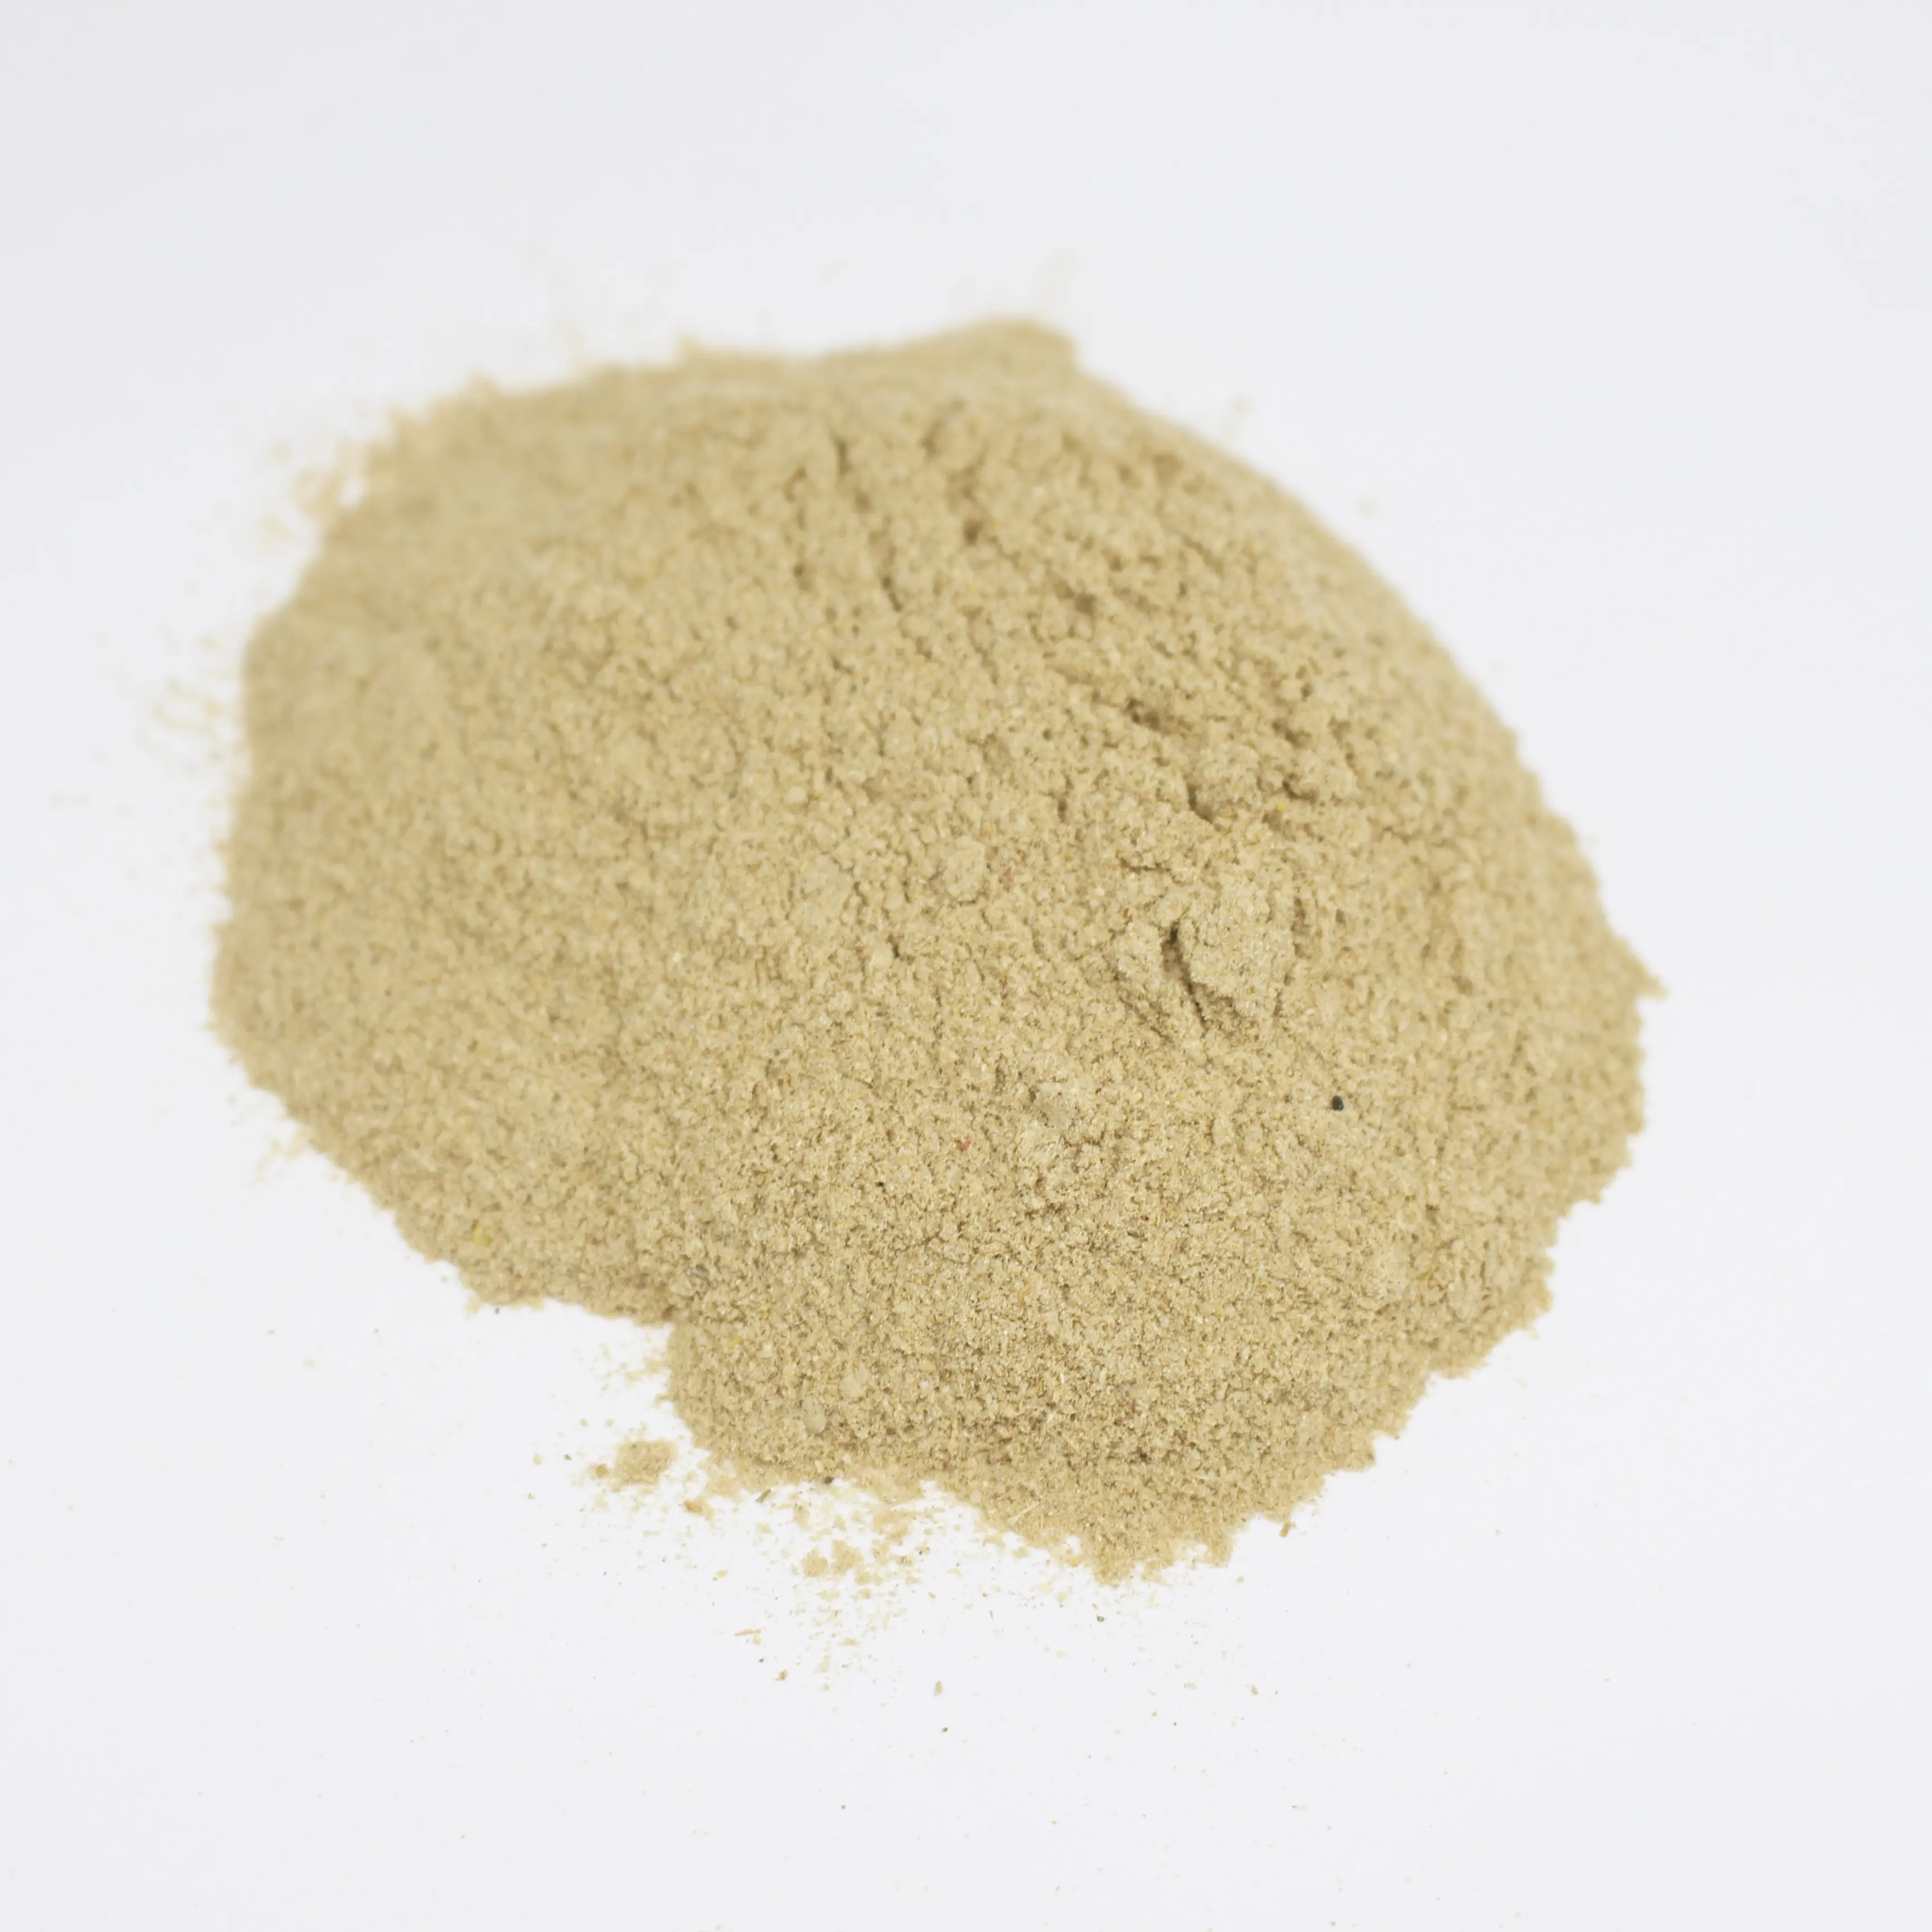 China Factory Supply soybean protein powder with best price